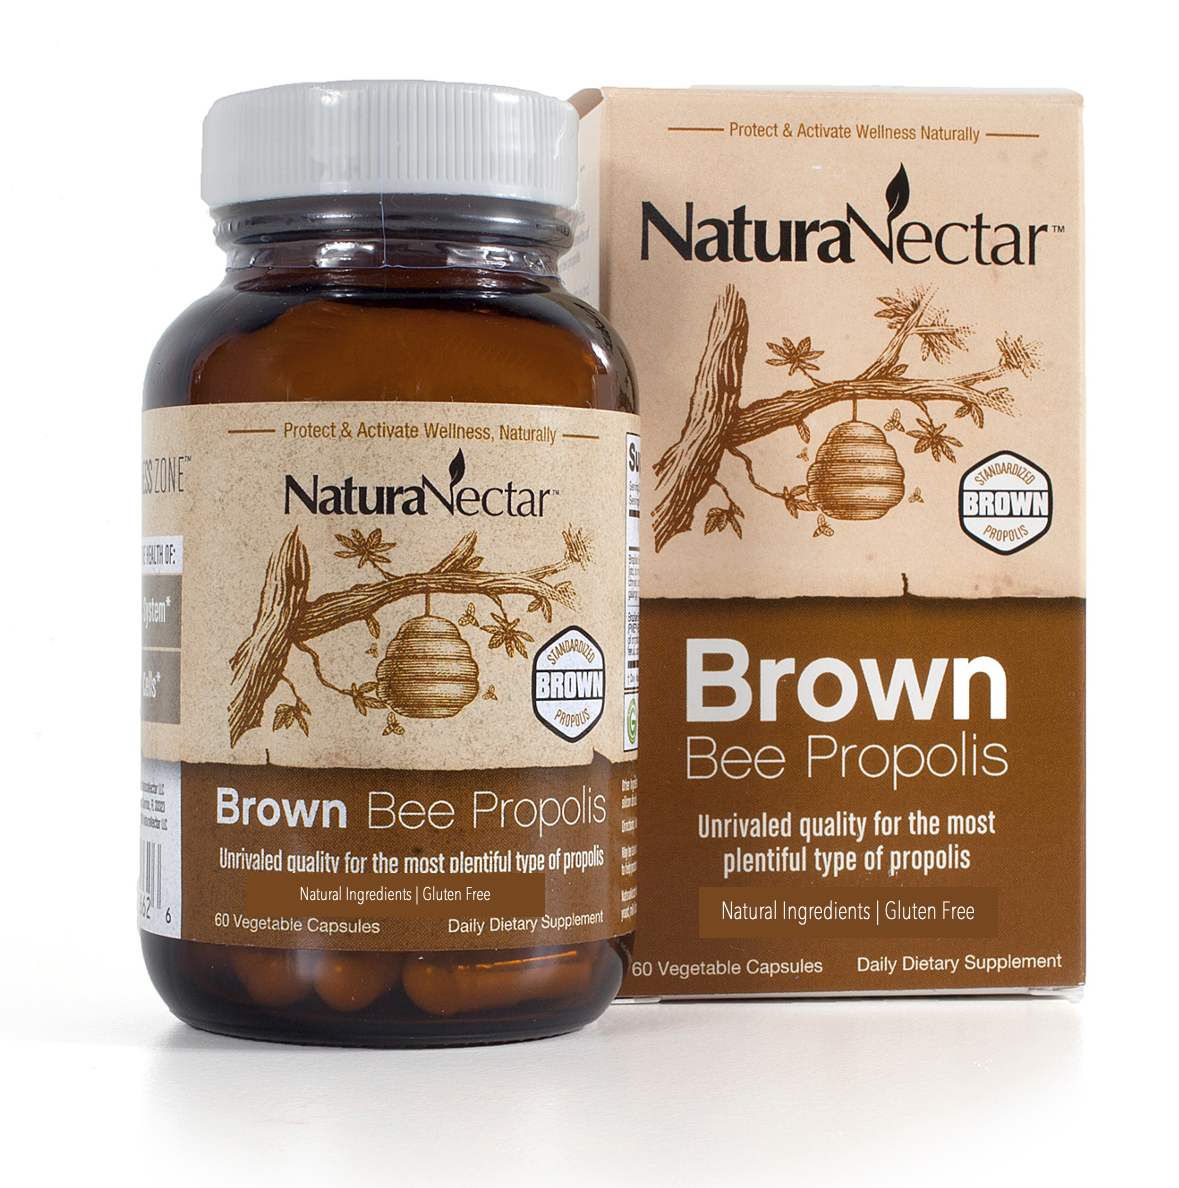 Brown Bee Propolis – Support your immune system* with standardized 8mg servings of healthy polyphenols from the Brazilian Southern Atlantic Forest